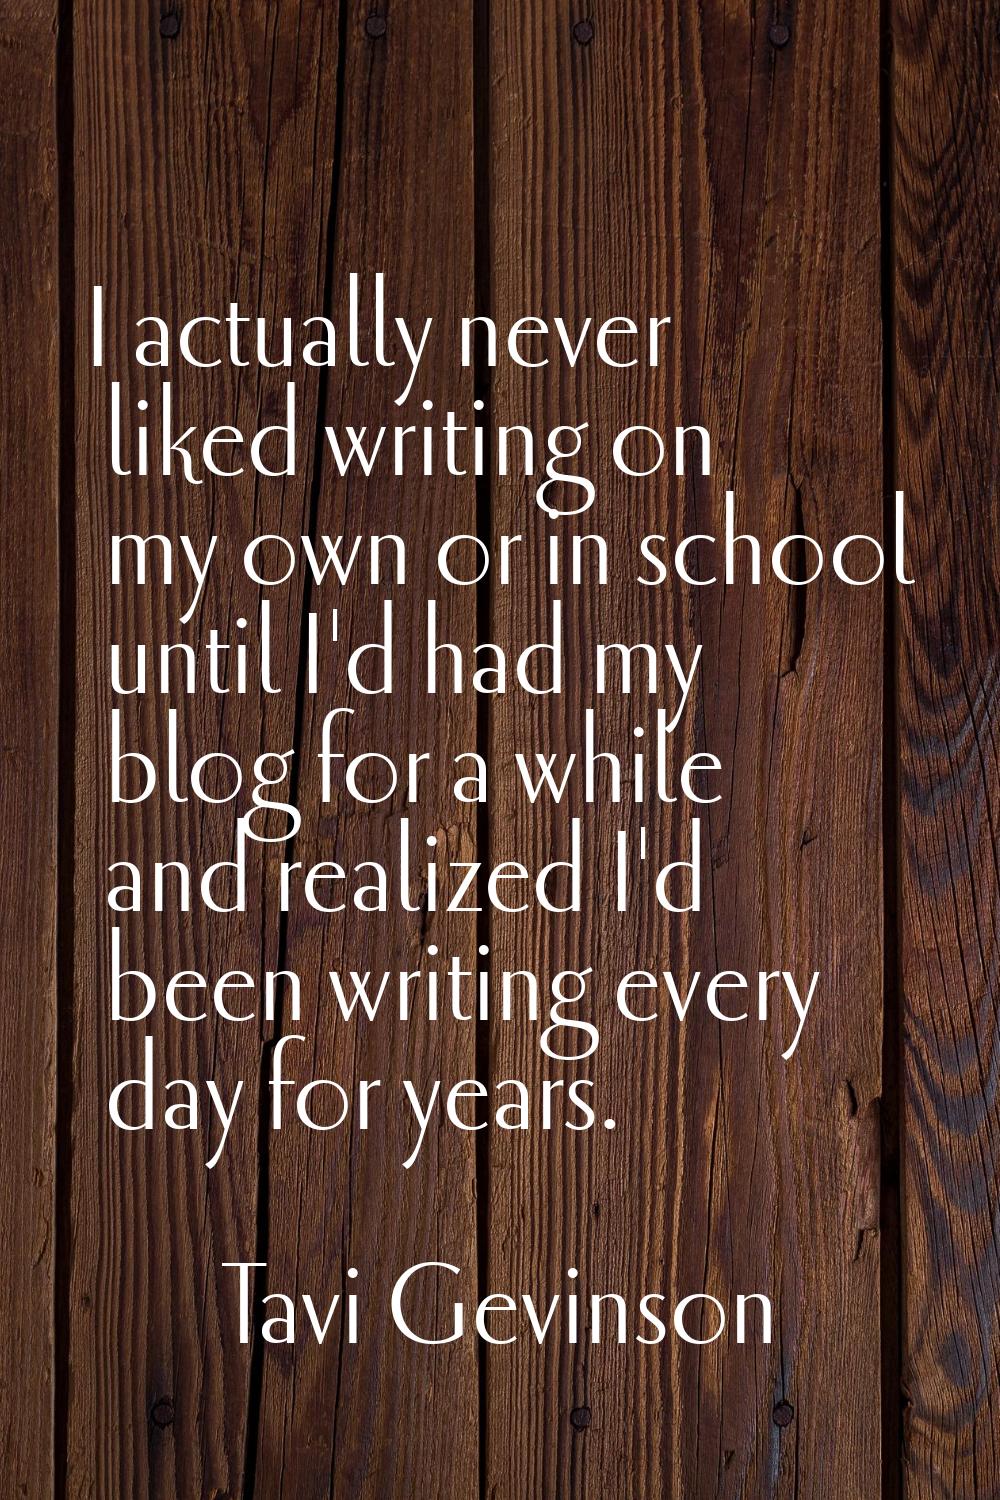 I actually never liked writing on my own or in school until I'd had my blog for a while and realize